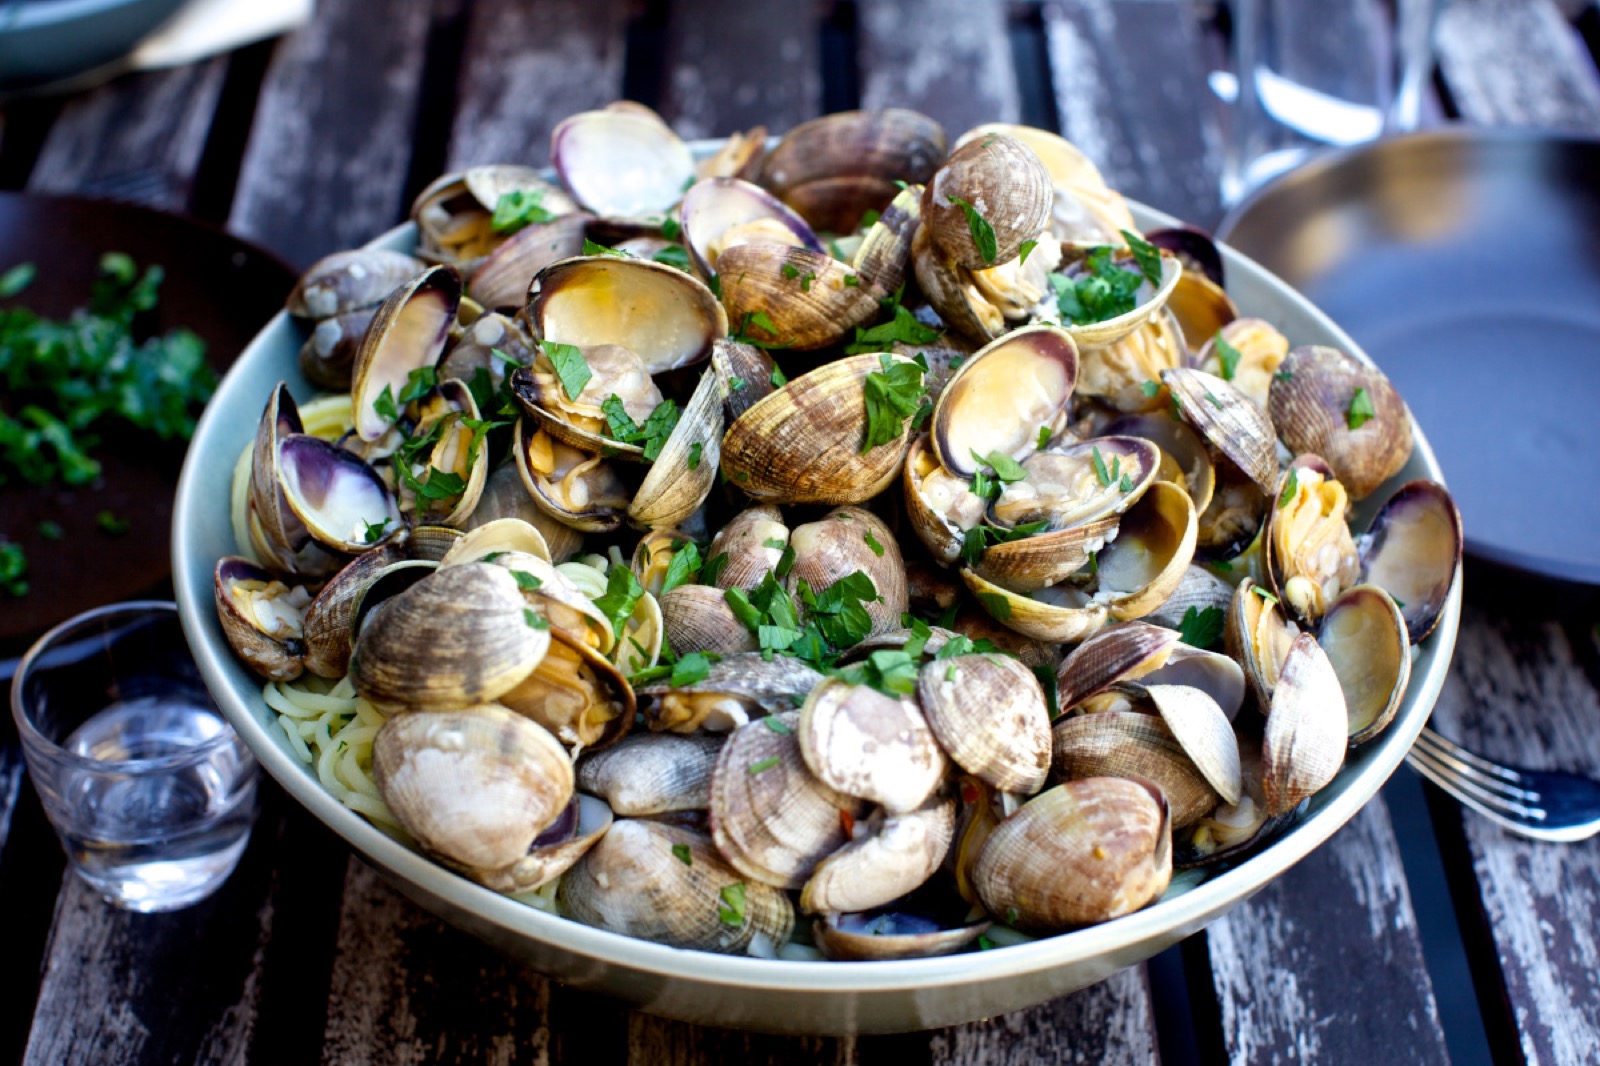 Say Yum Or Yuck to Seafood Dishes to Know How Picky You… Quiz Clams